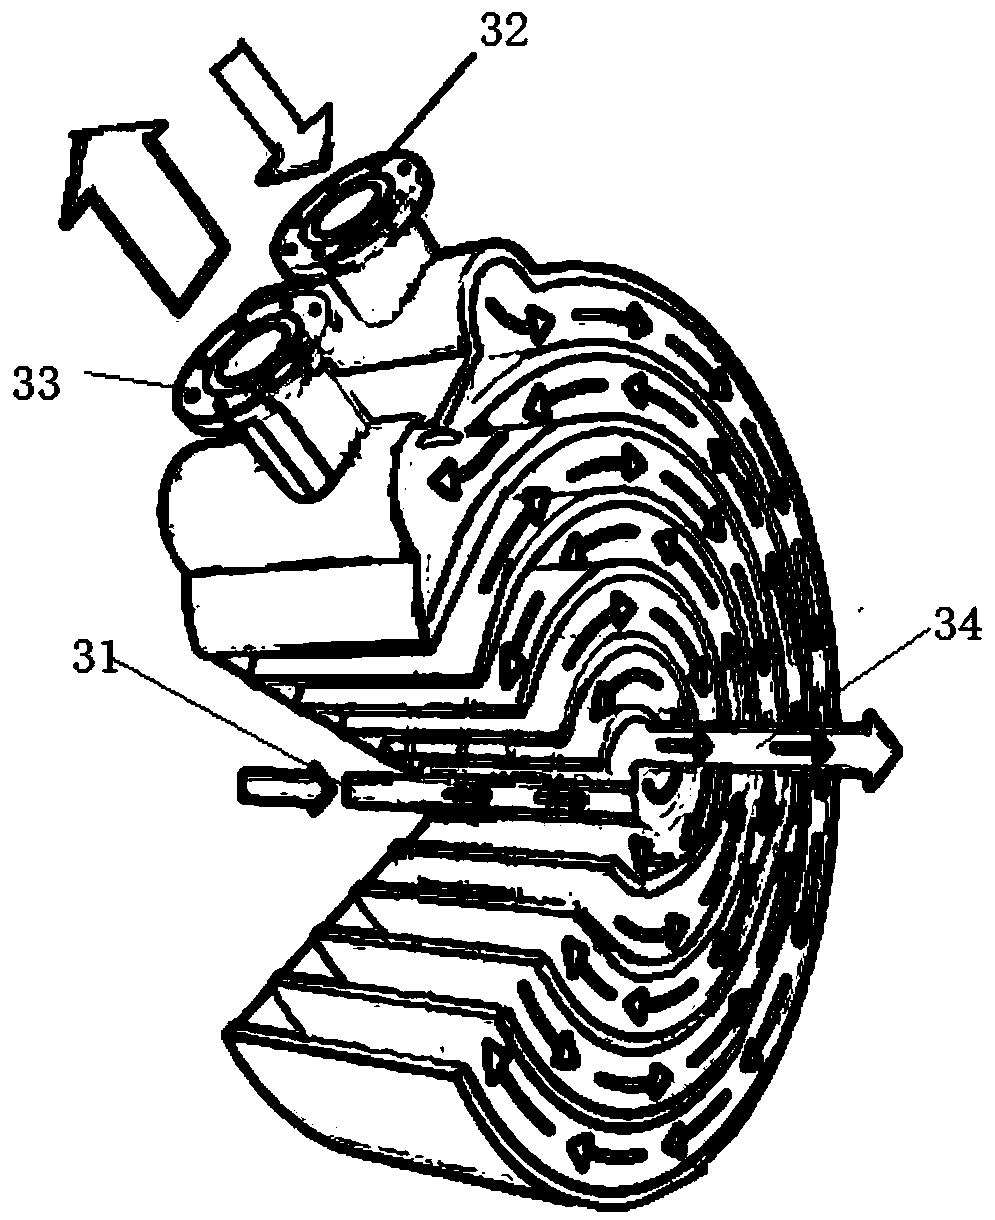 Spiral plate heat exchanger with protection function for sludge and working method thereof